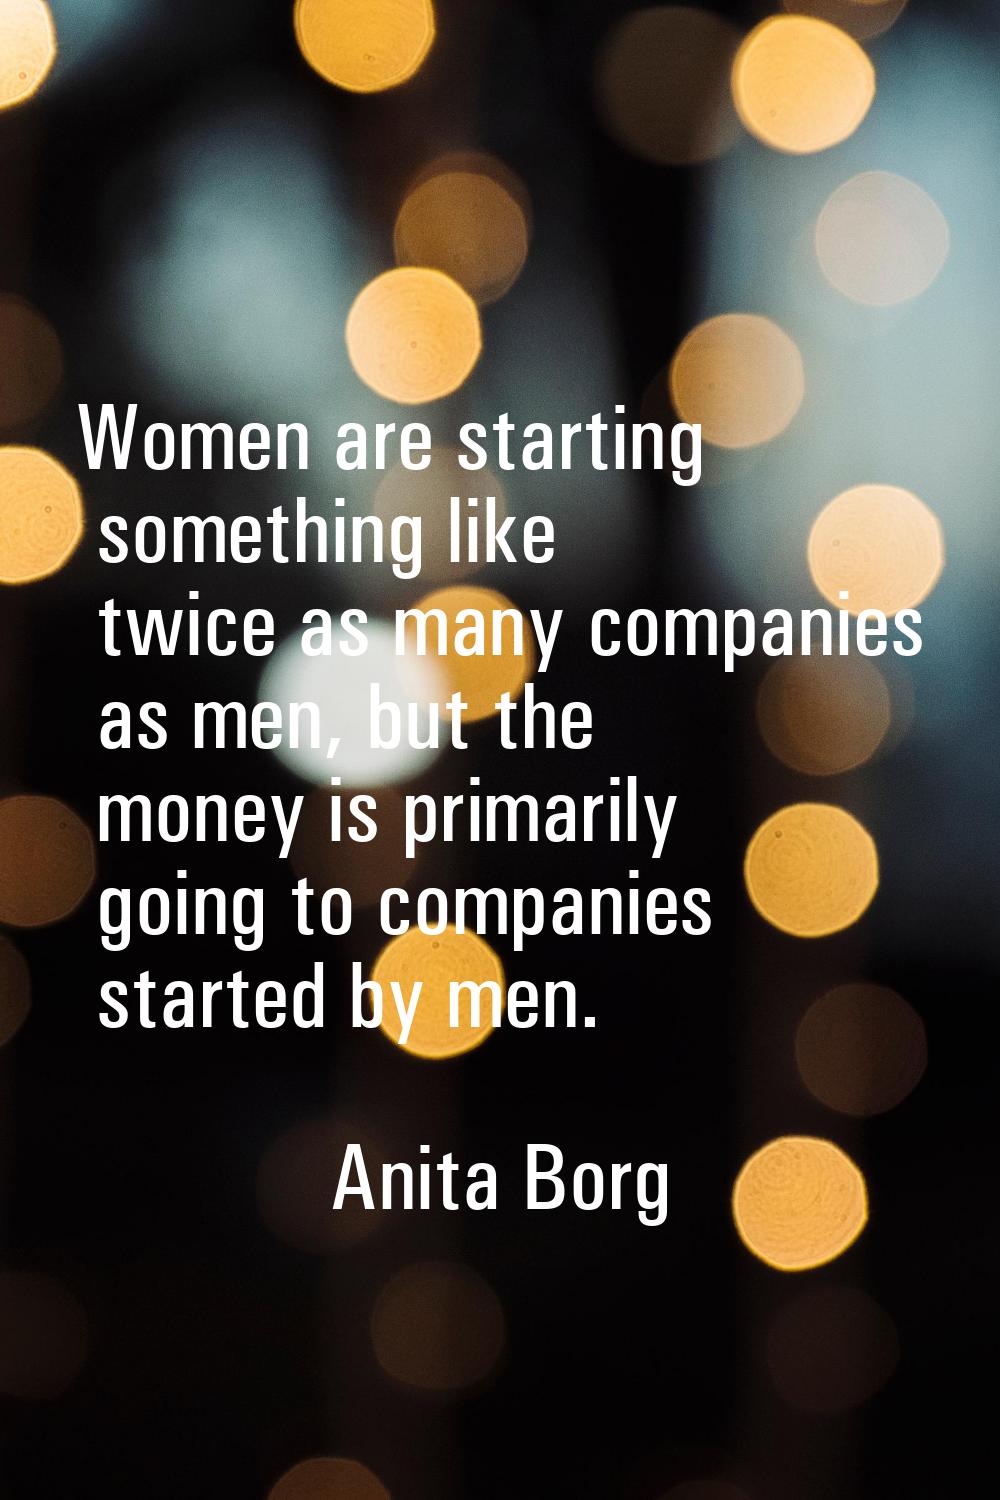 Women are starting something like twice as many companies as men, but the money is primarily going 